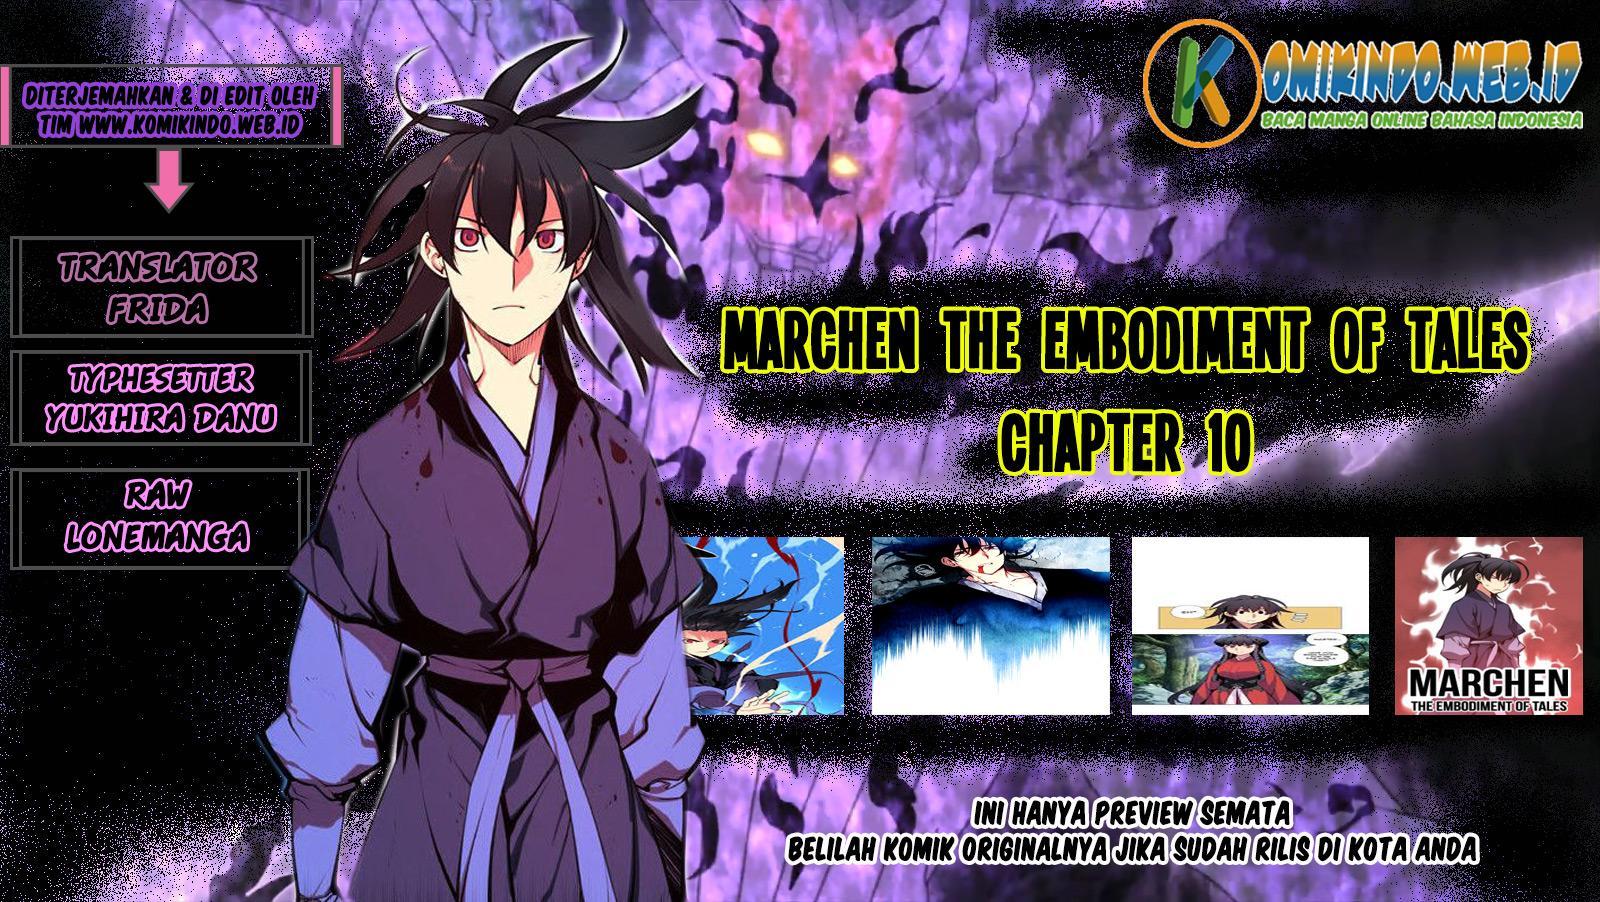 Märchen The Embodiment of Tales Chapter 10